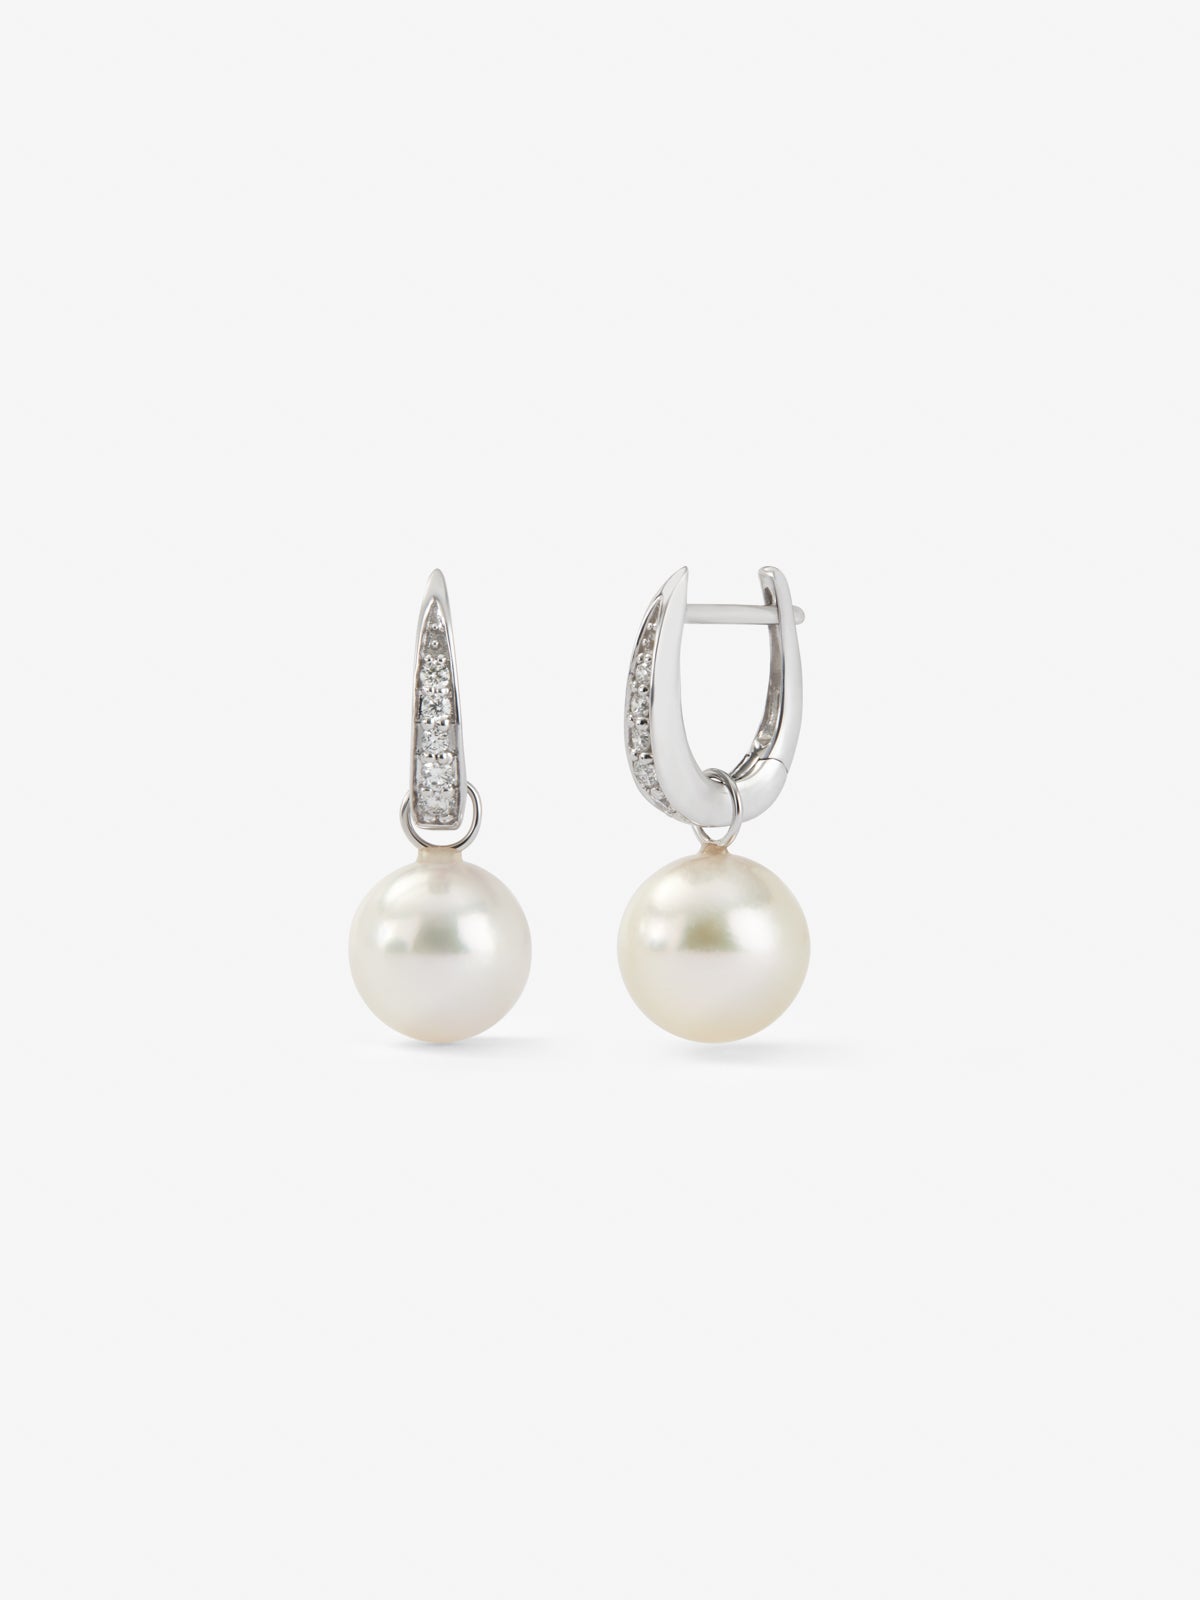 18K white gold earrings with 2 9.5mm pearls and 10 brilliant-cut diamonds with a total of 0.12 cts